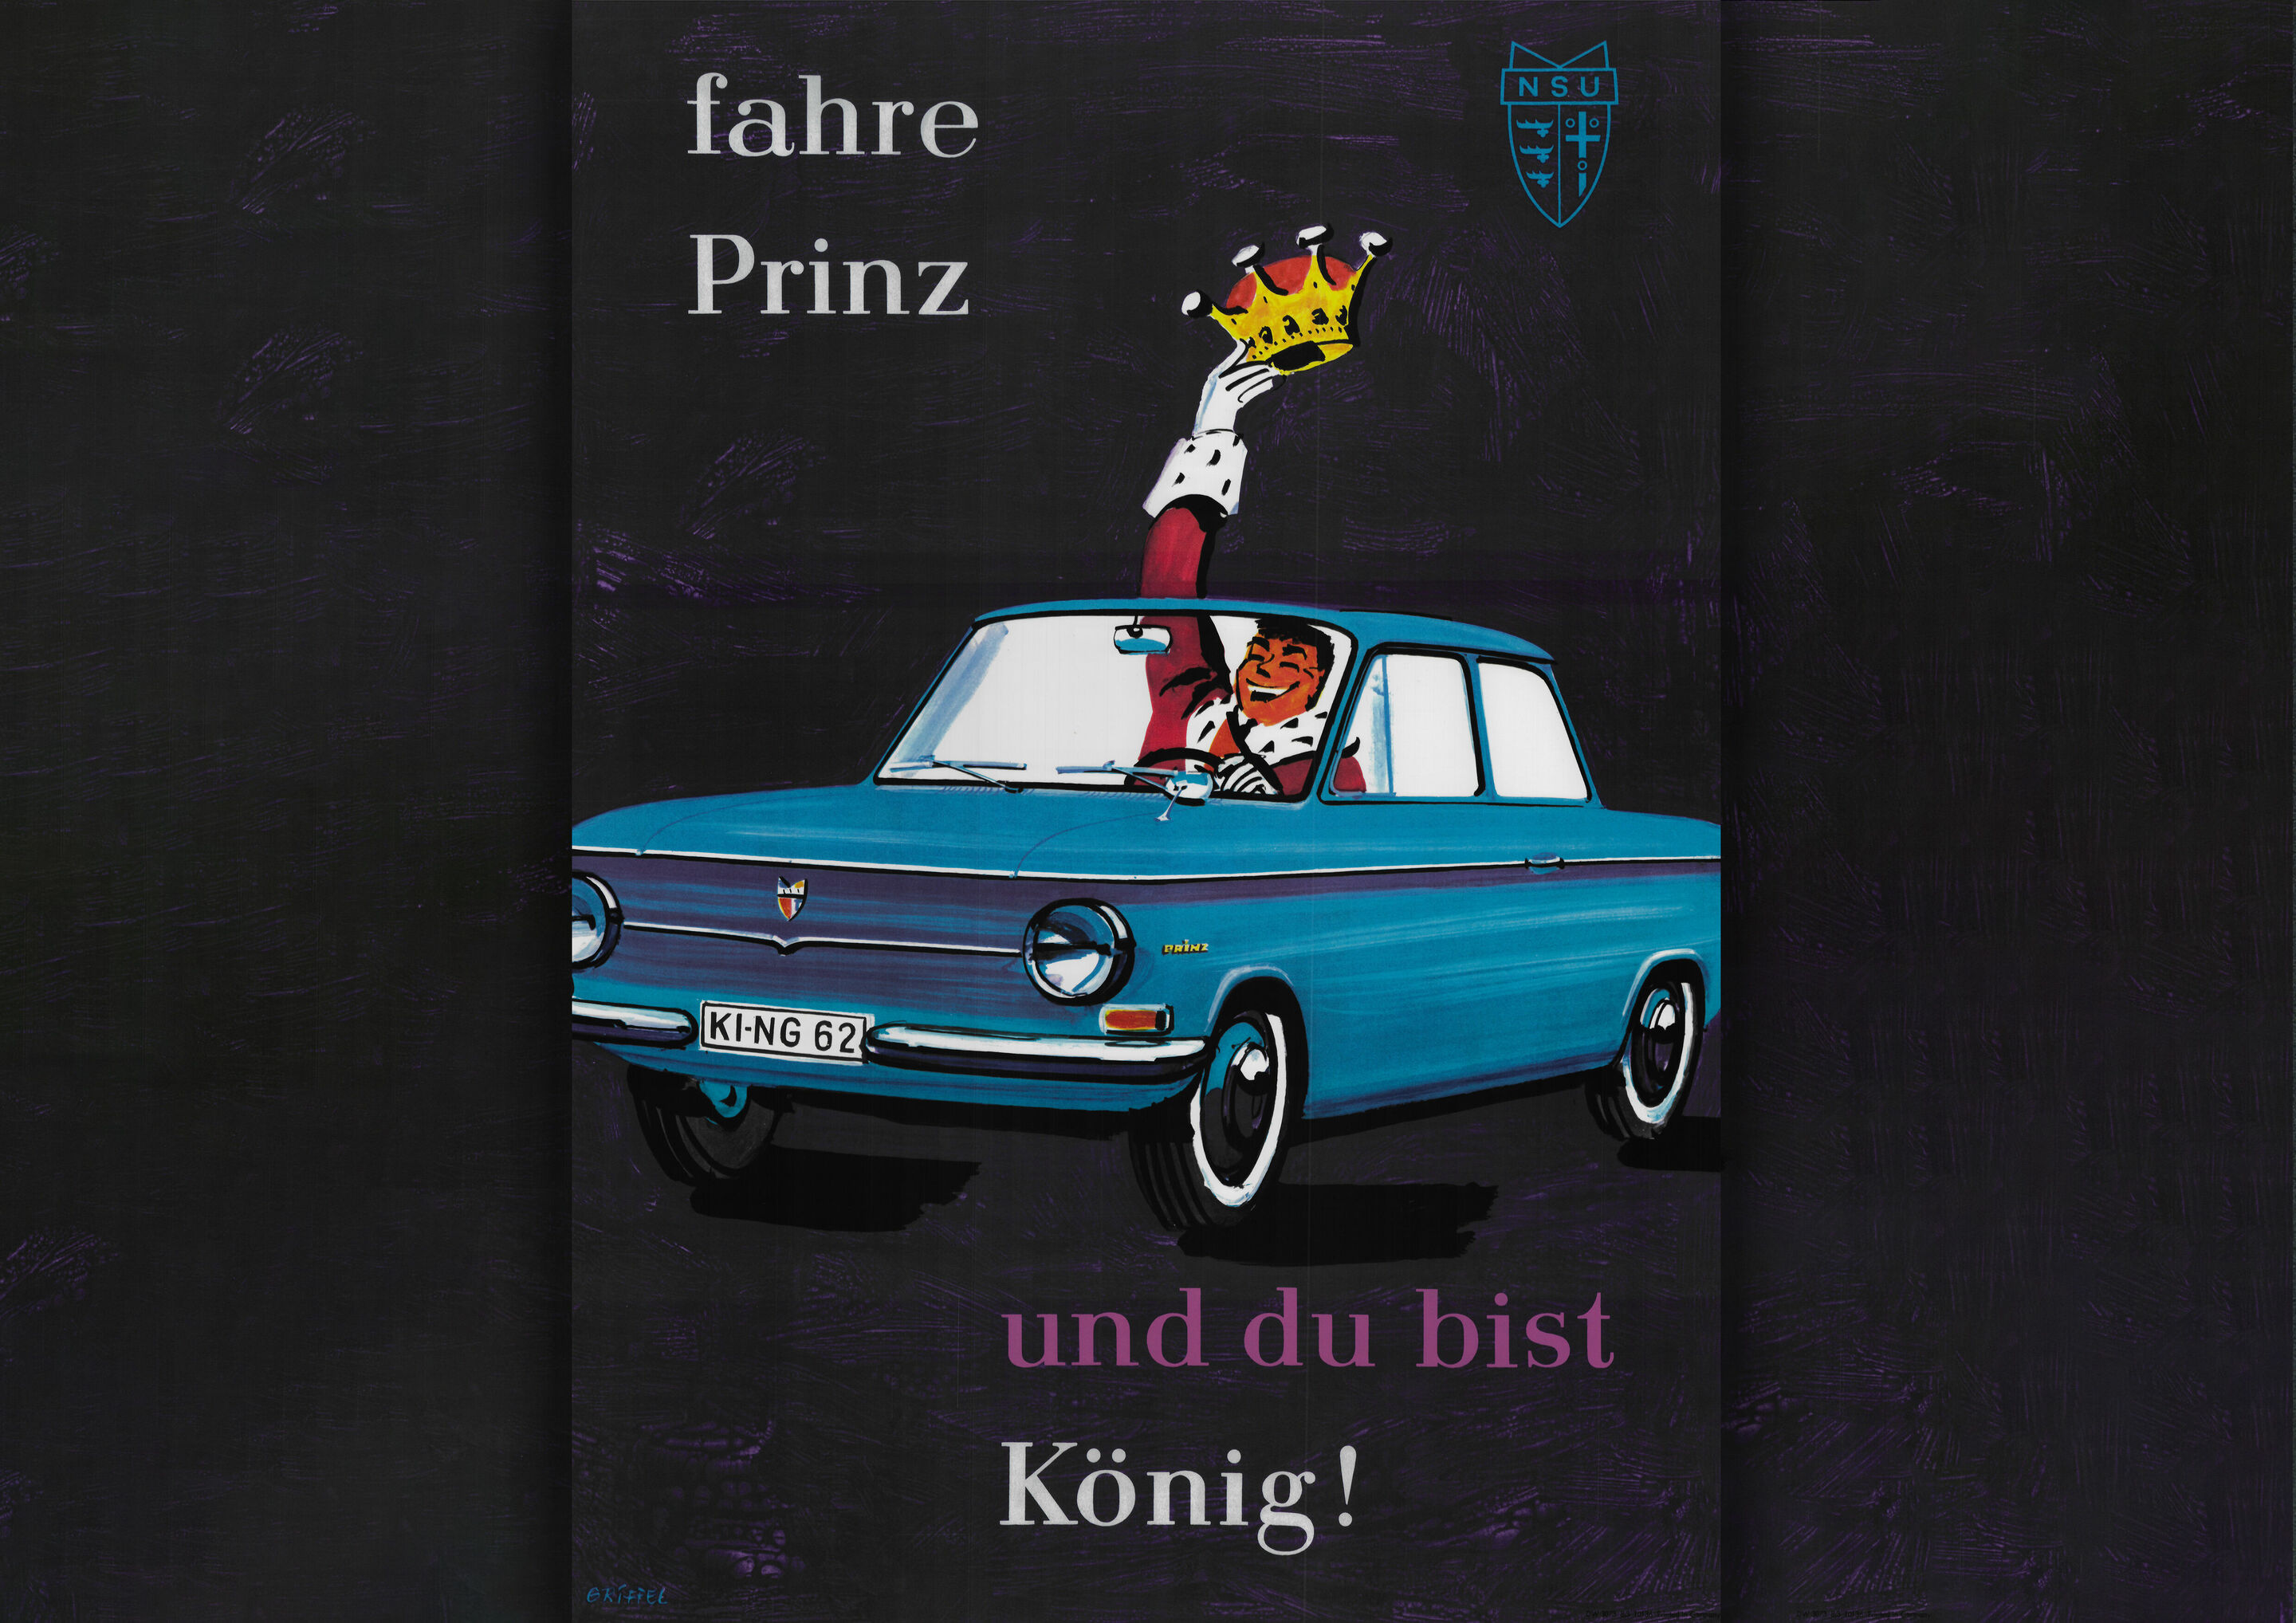 “Drive Prinz and you’re a king”